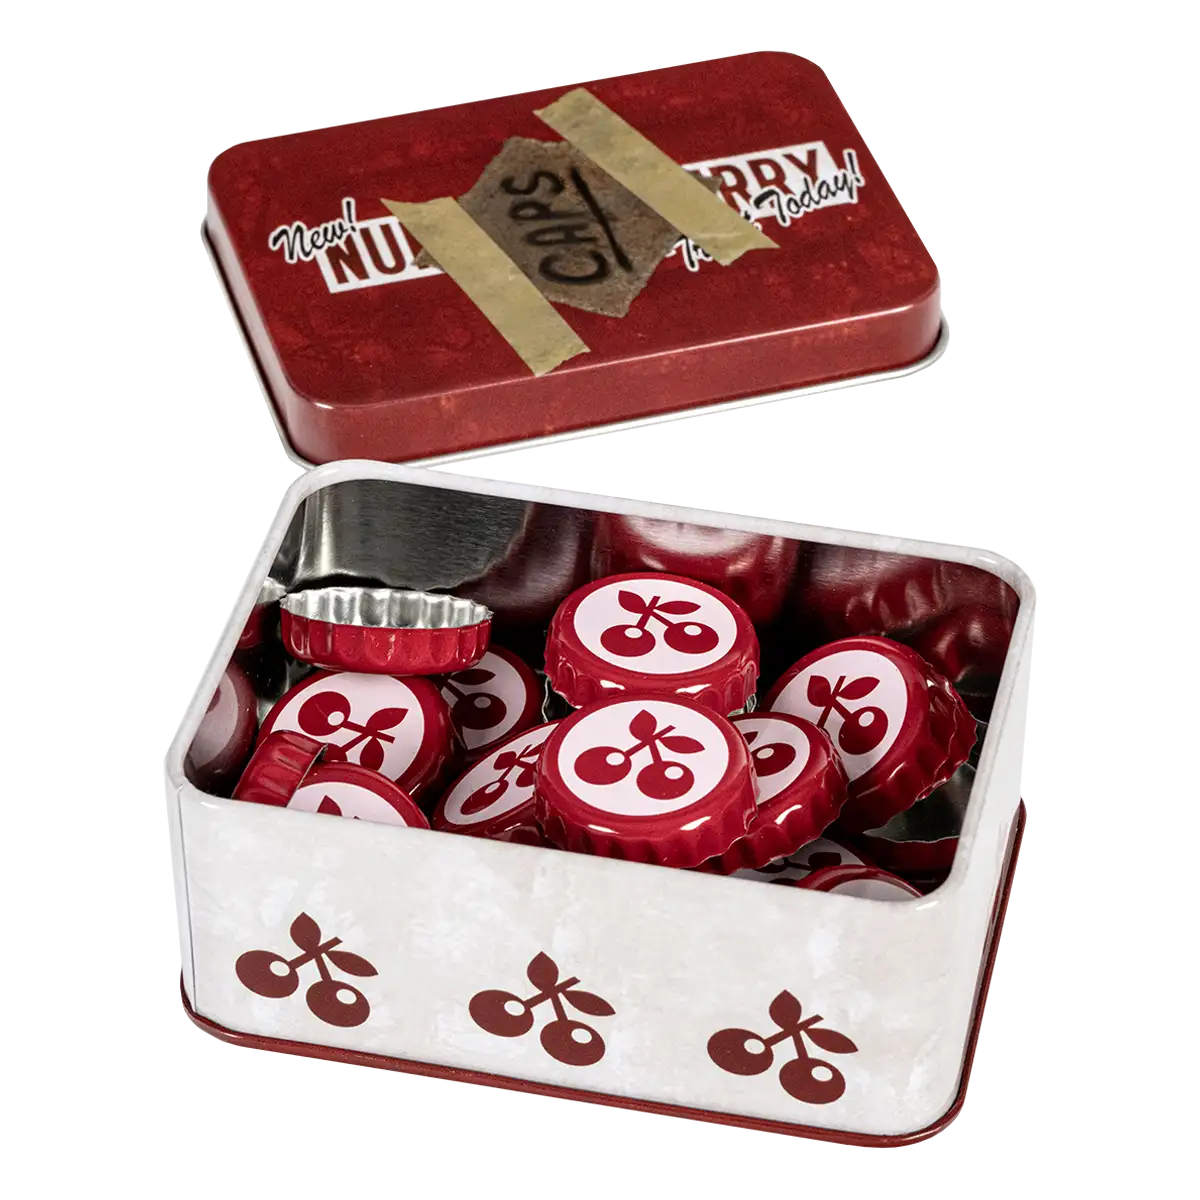 Fallout Bottle Cap Series "Nuka Cola Cherry" with Collection Tin Cover